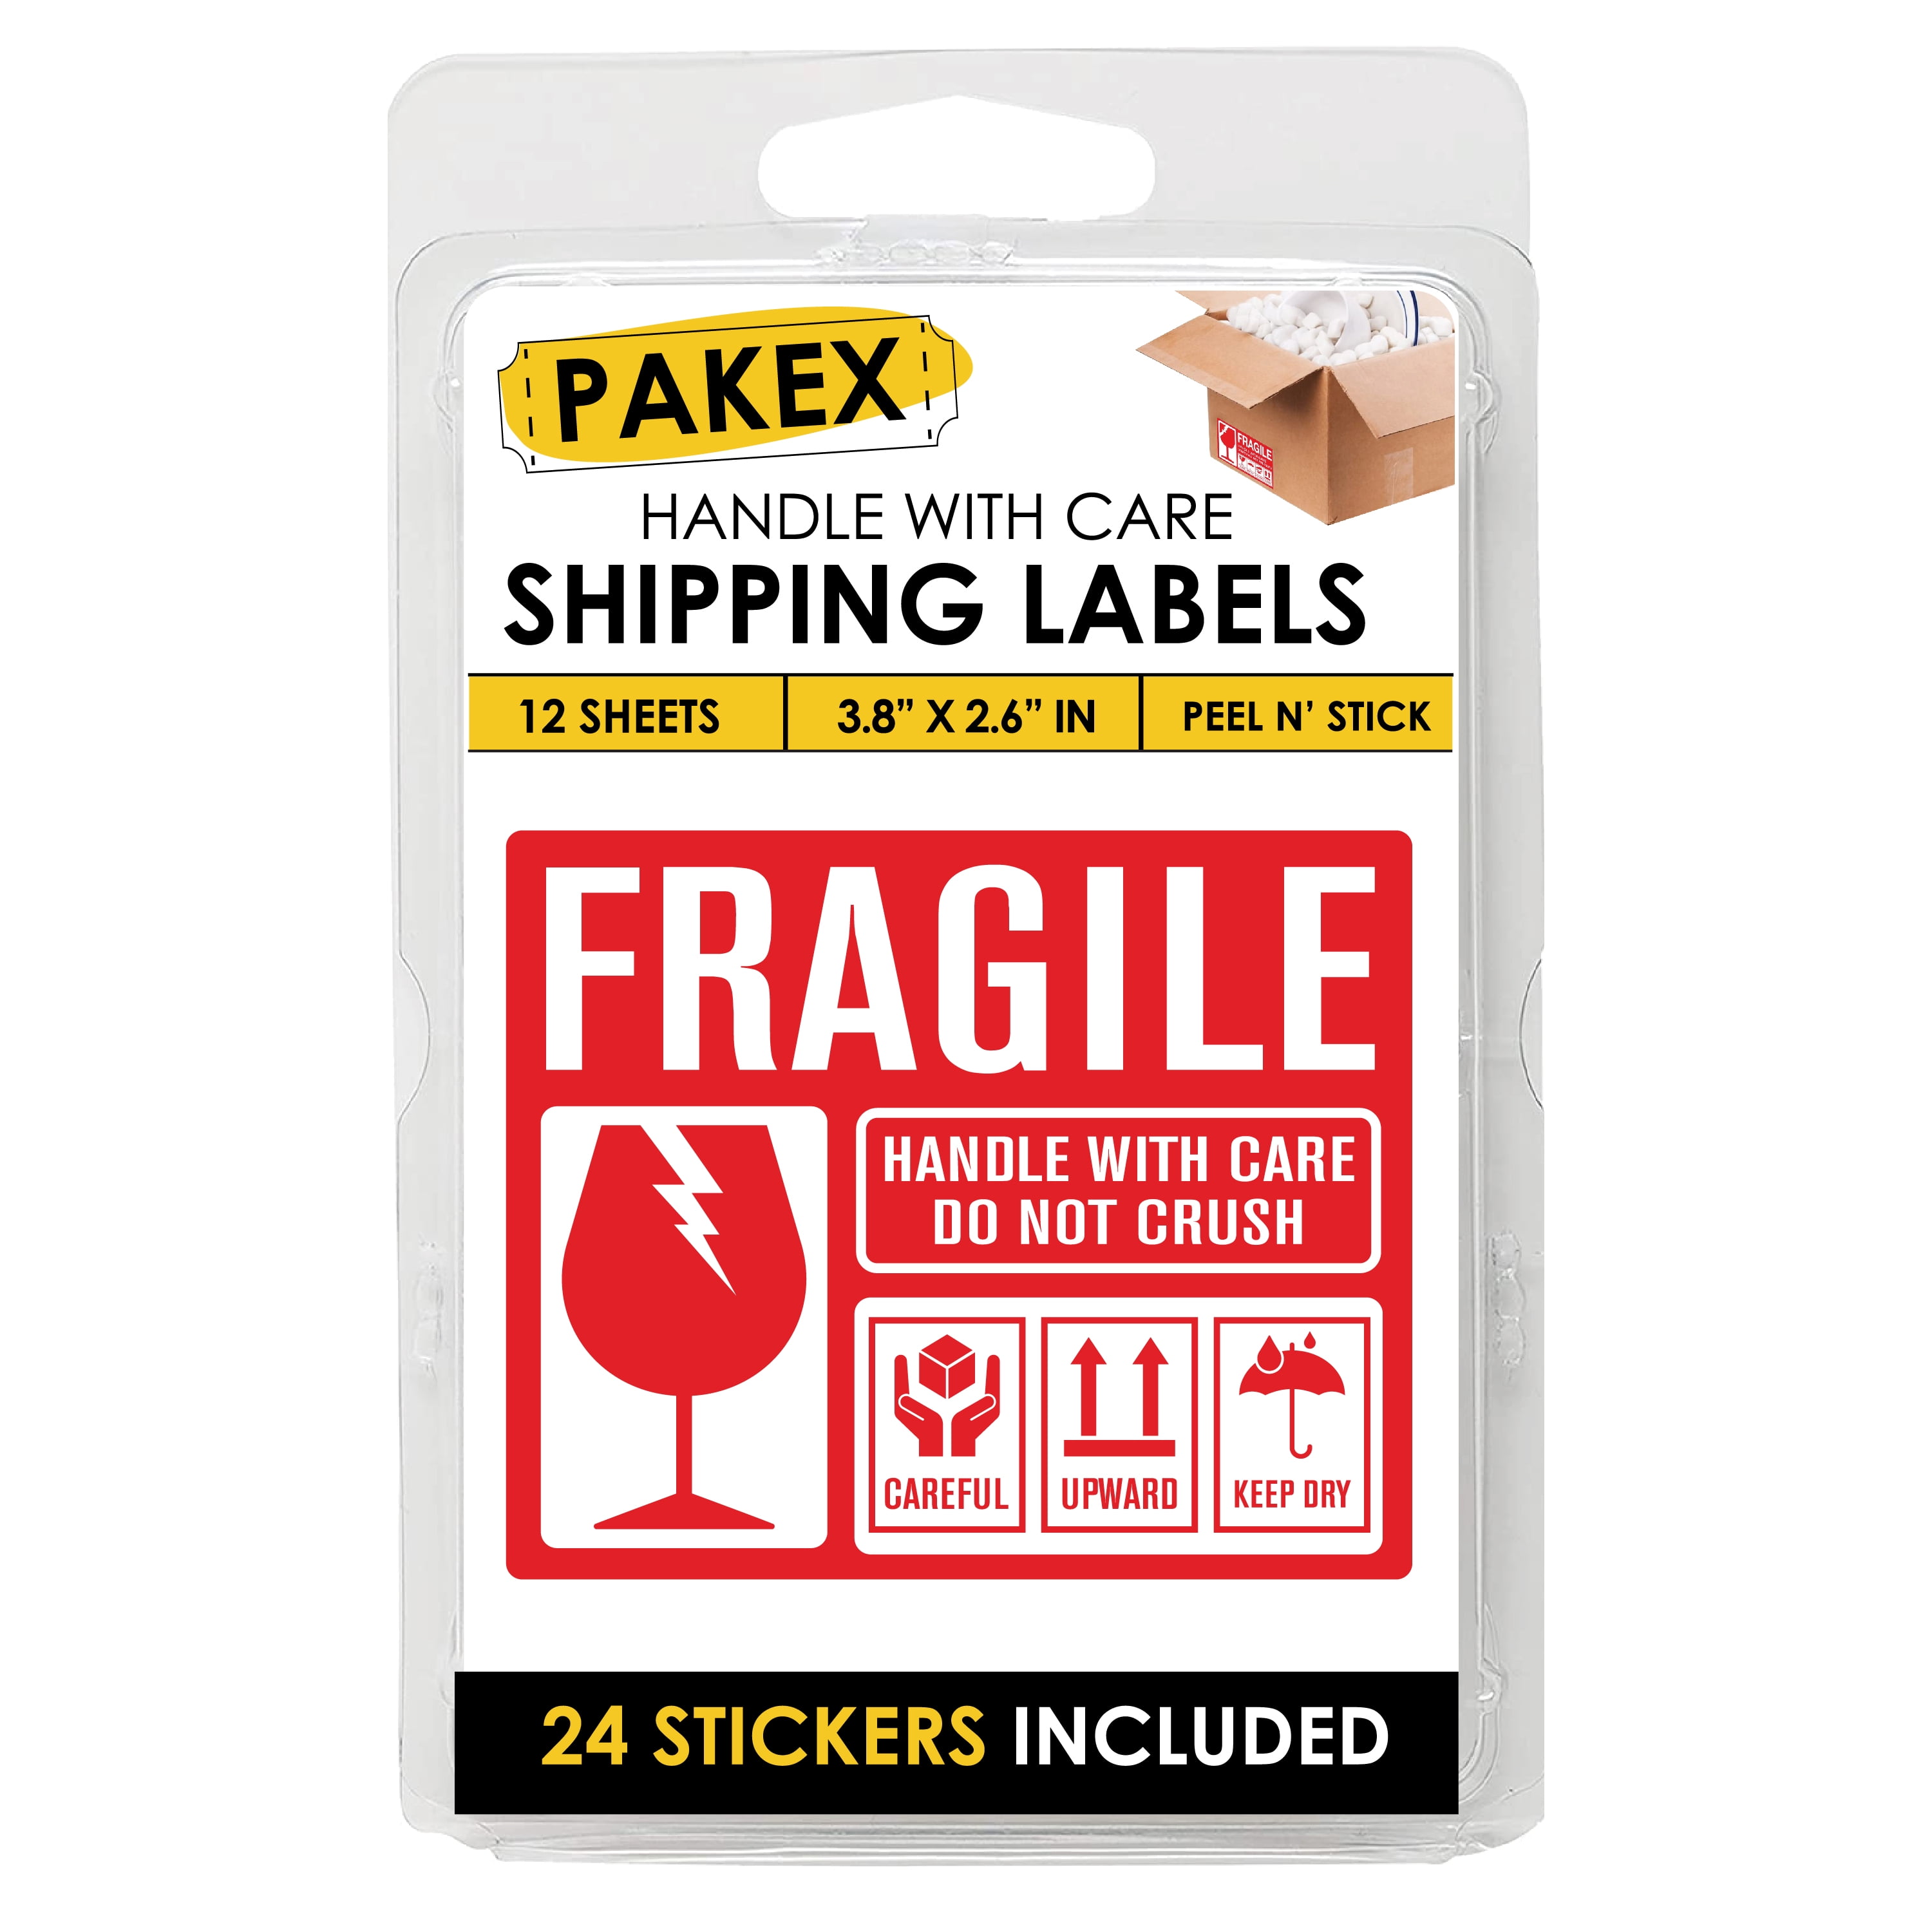 1.5"x1" Oval - 500 Labels CAUTION SHARP Warning Handle with Care Stickers 